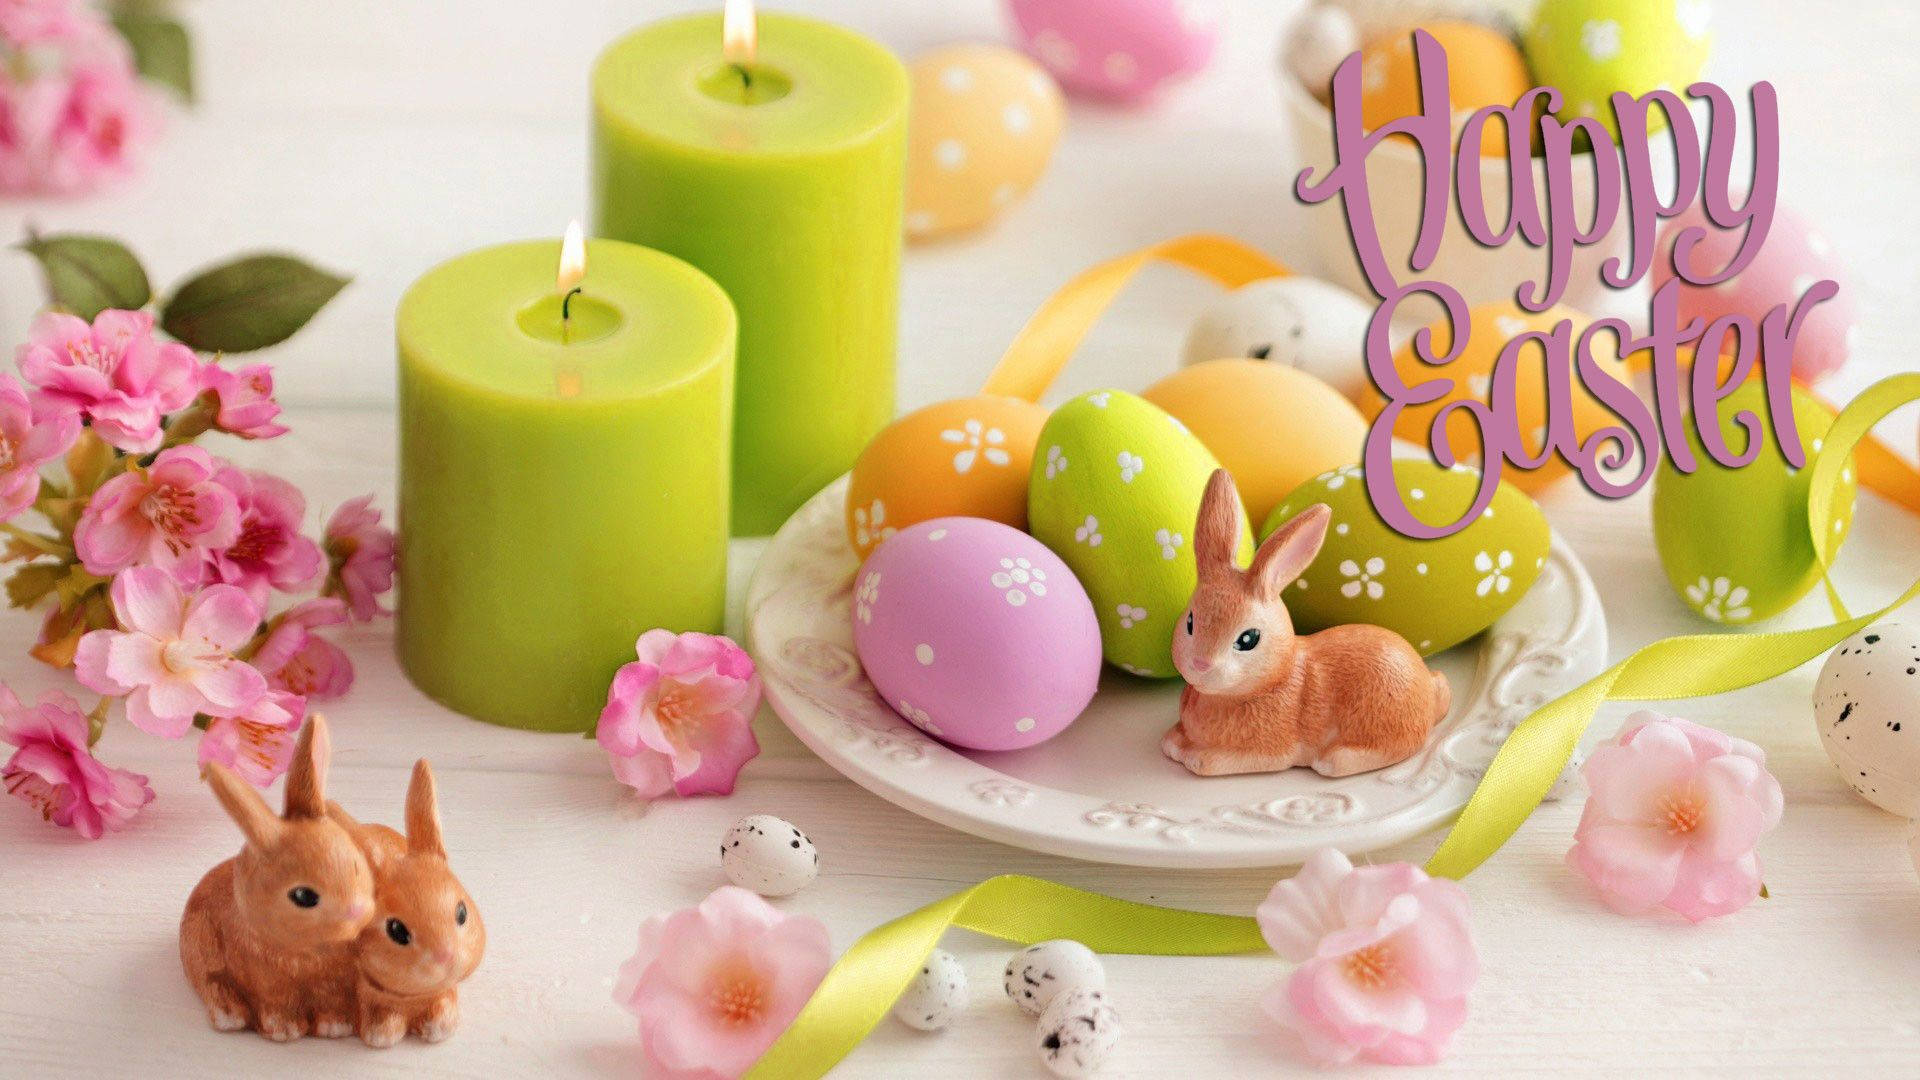 Update more than 67 wallpaper happy easter in.cdgdbentre